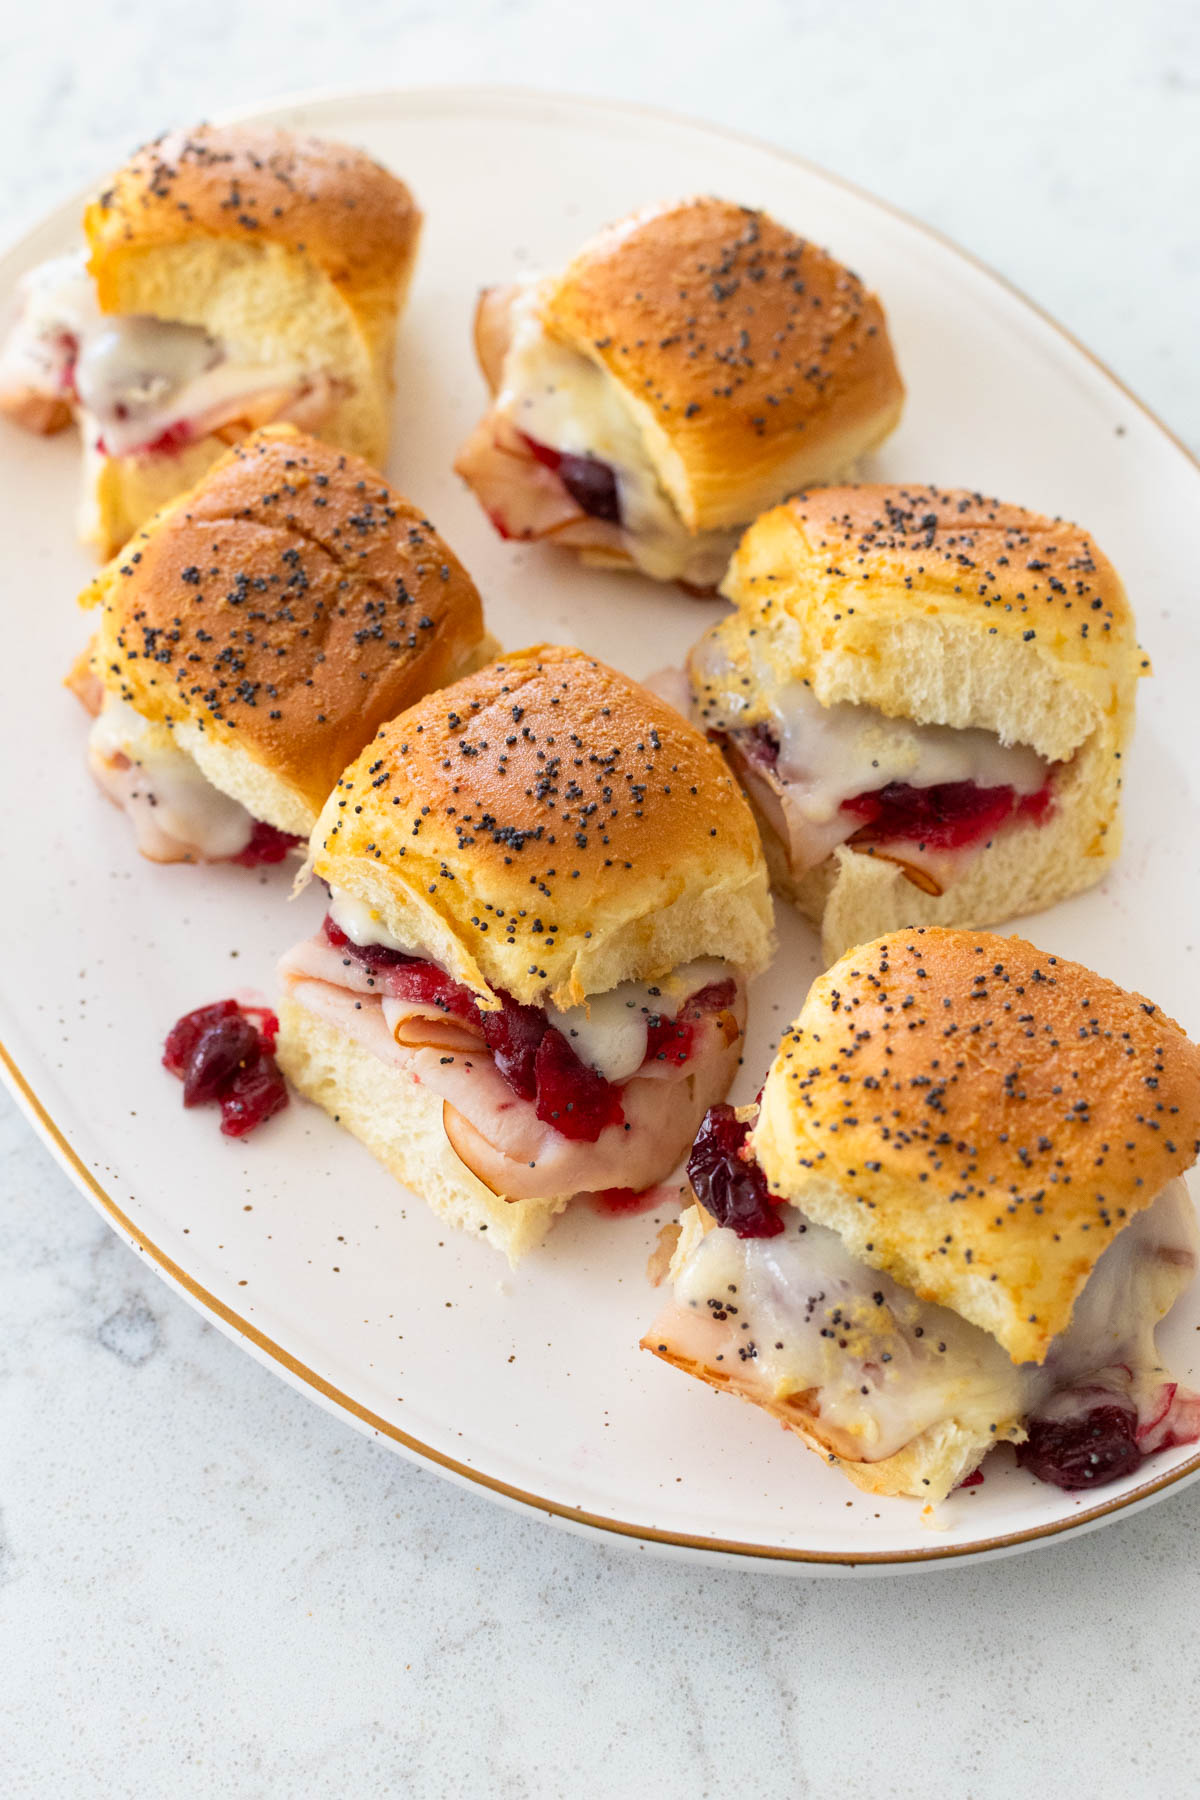 The baked cranberry turkey sliders are served on an oval platter.